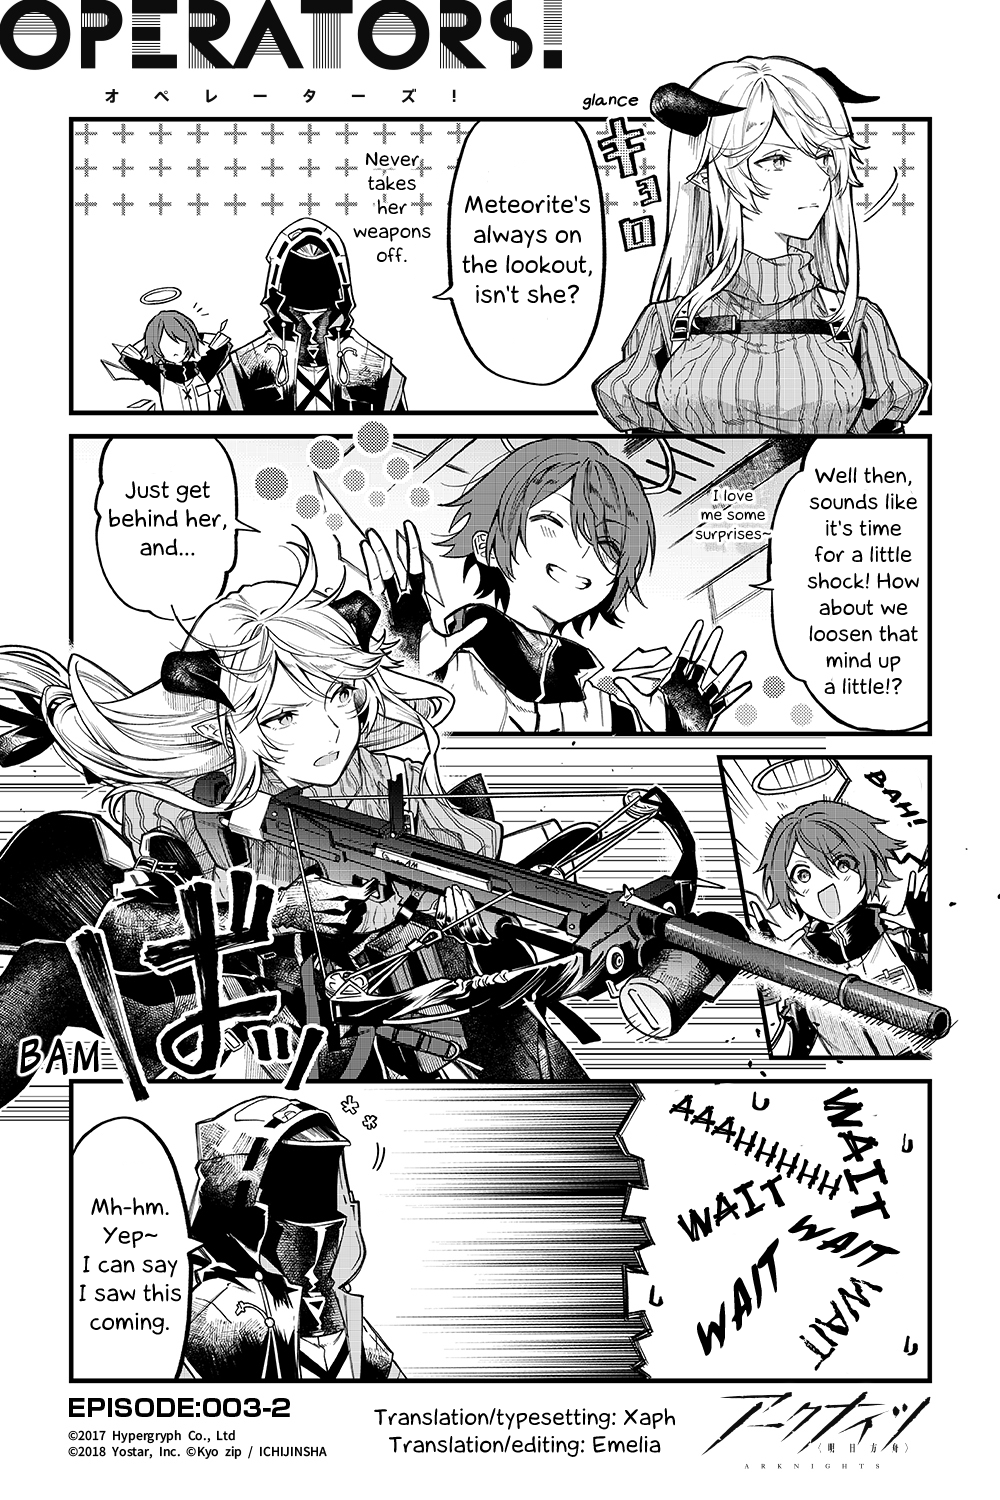 Arknights: Operators! - Page 1